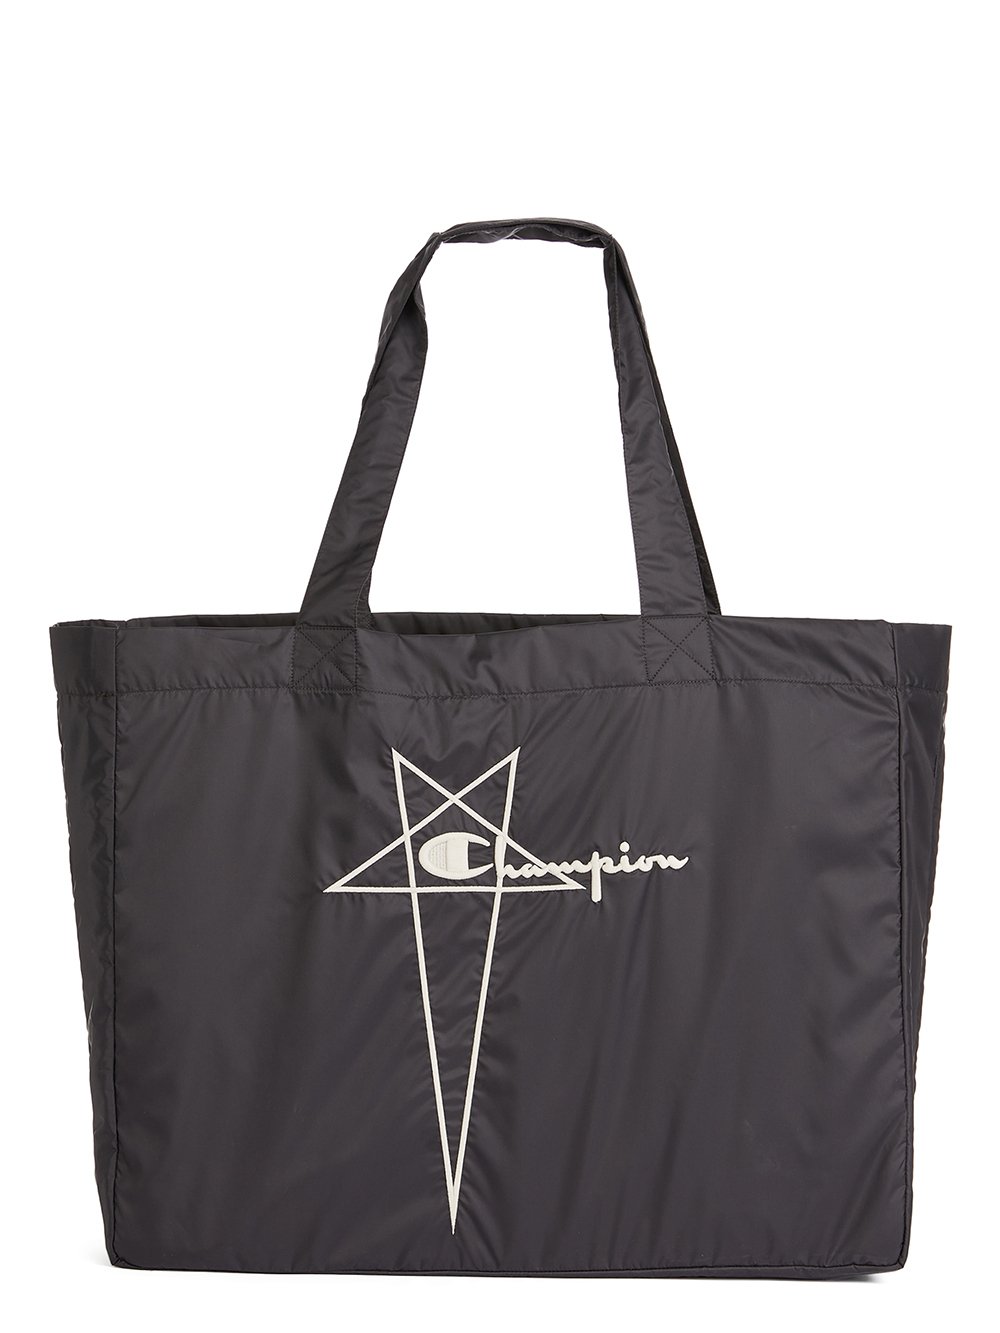 CHAMPION X RICK OWENS TOTE IN BLACK RECYCLED NYLON